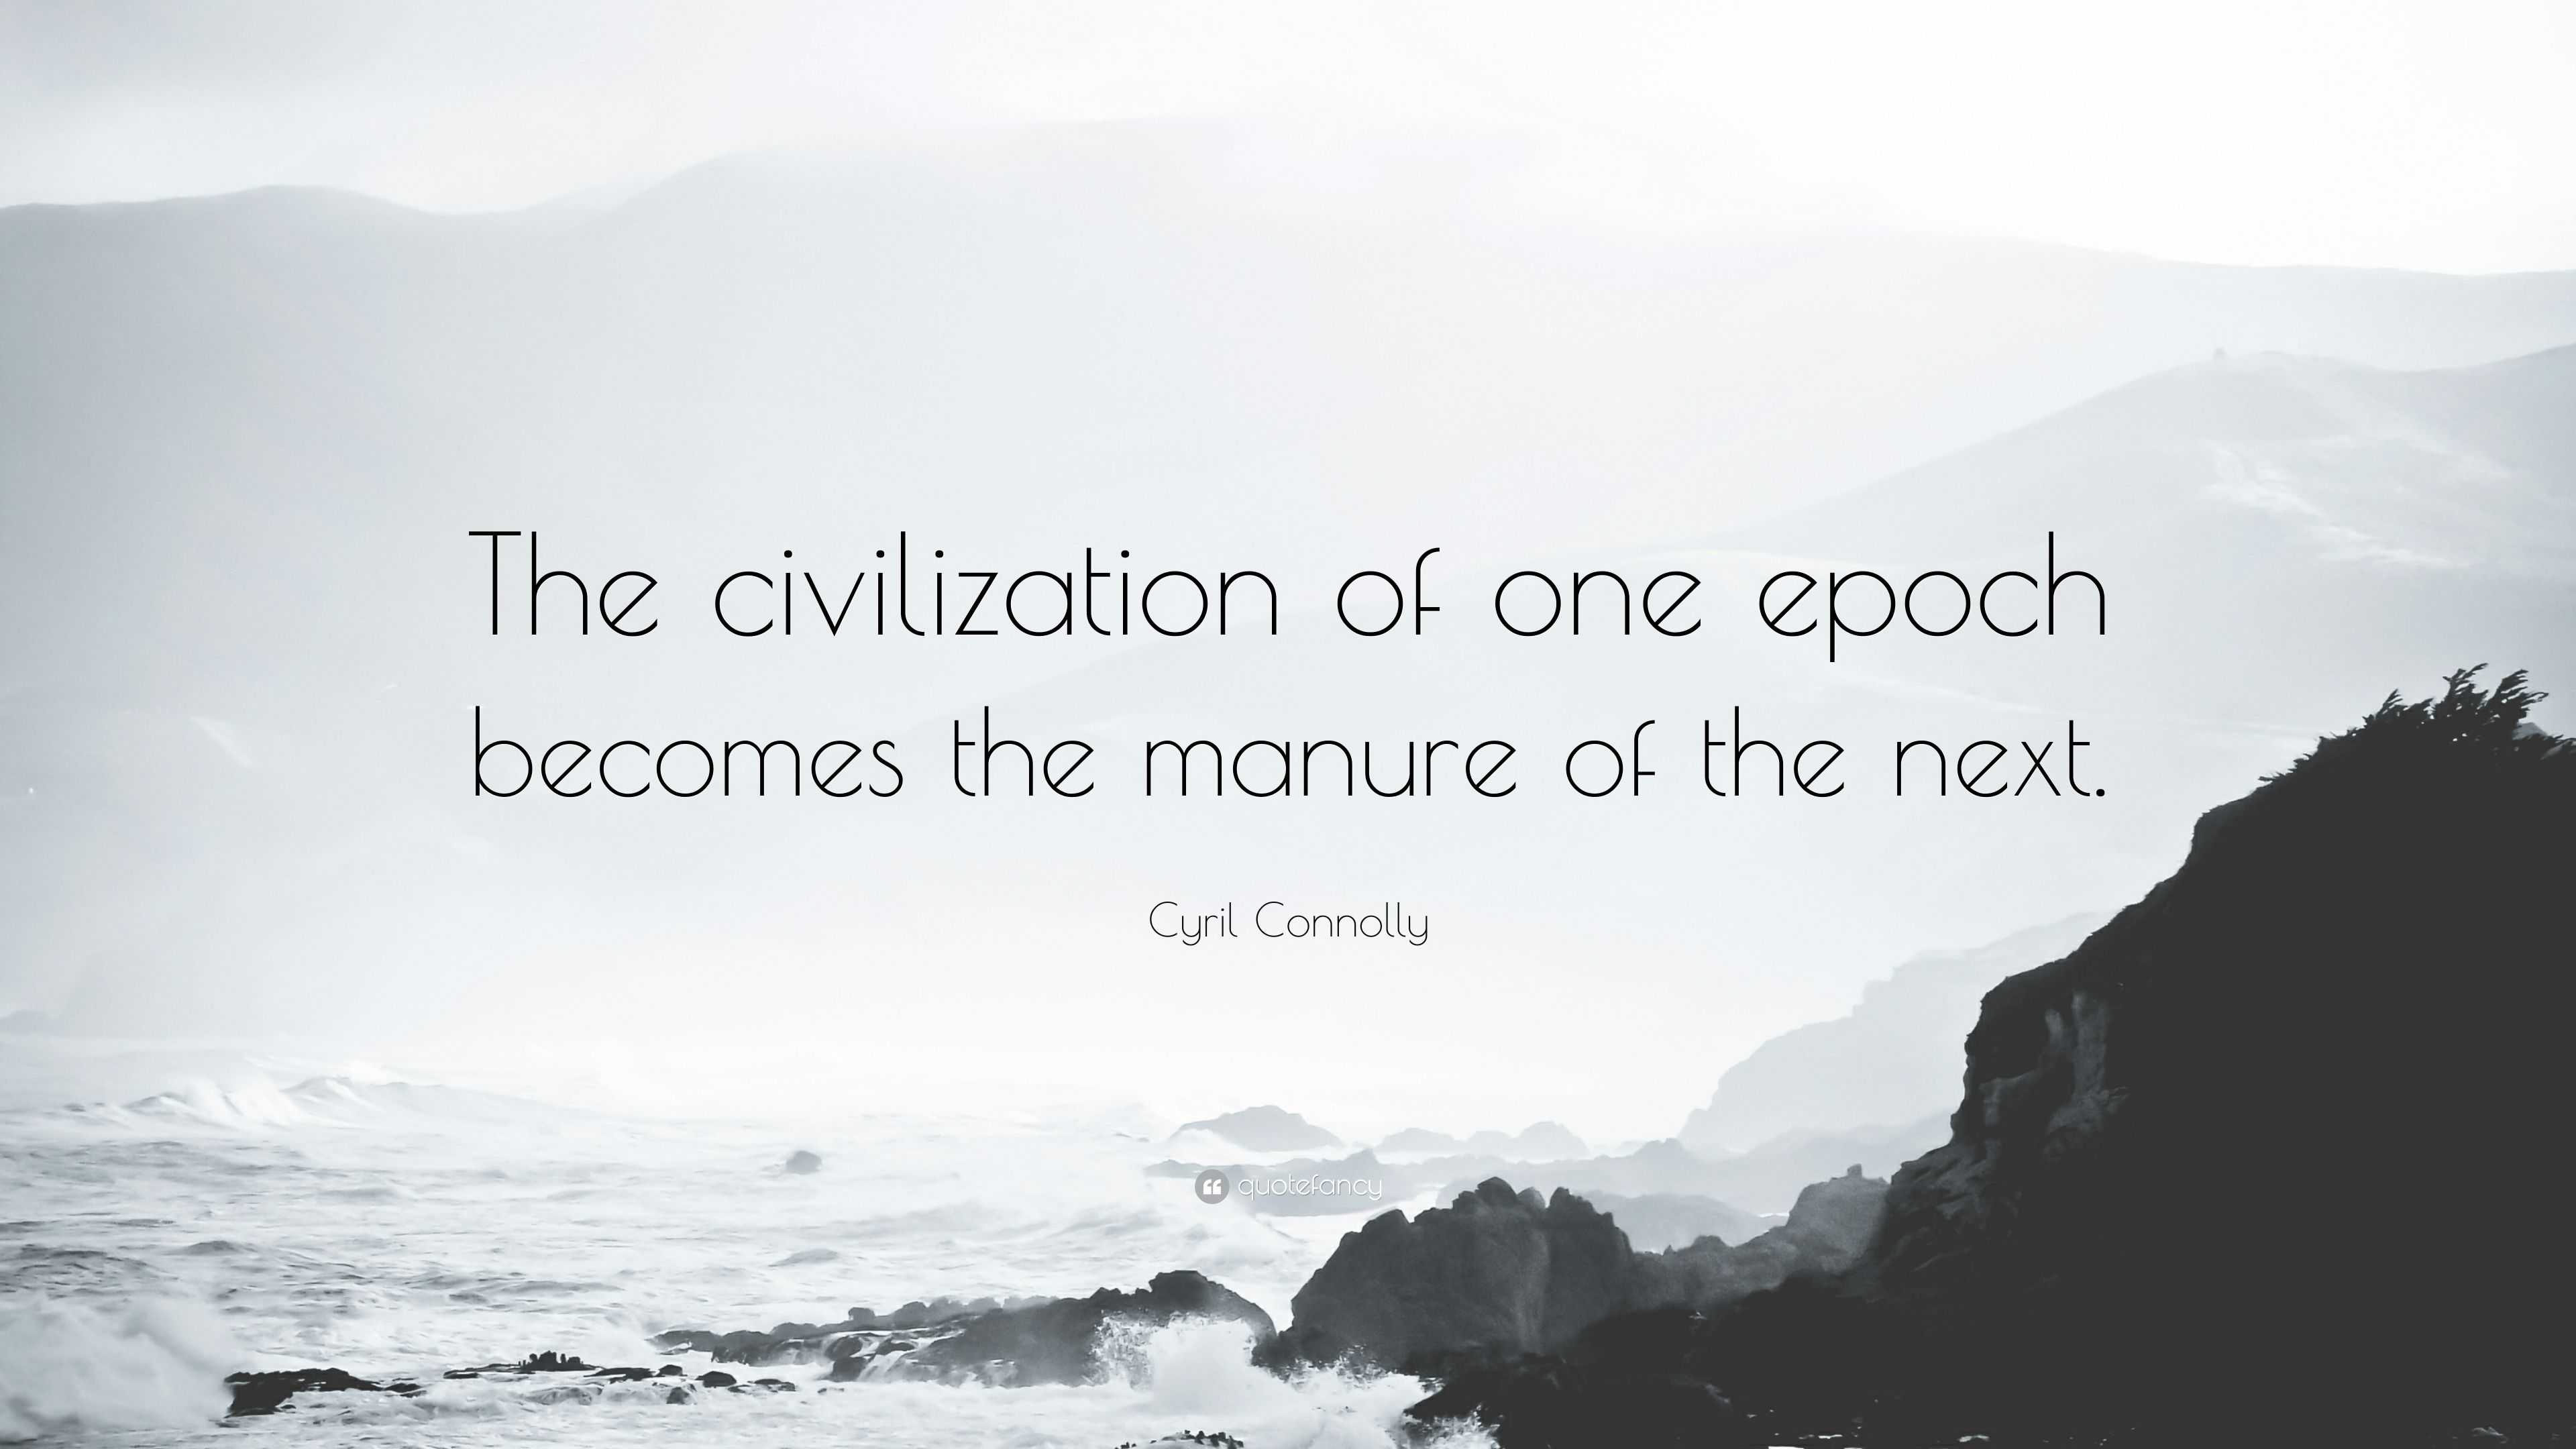 Cyril Connolly Quote “the Civilization Of One Epoch Becomes The Manure Of The Next”